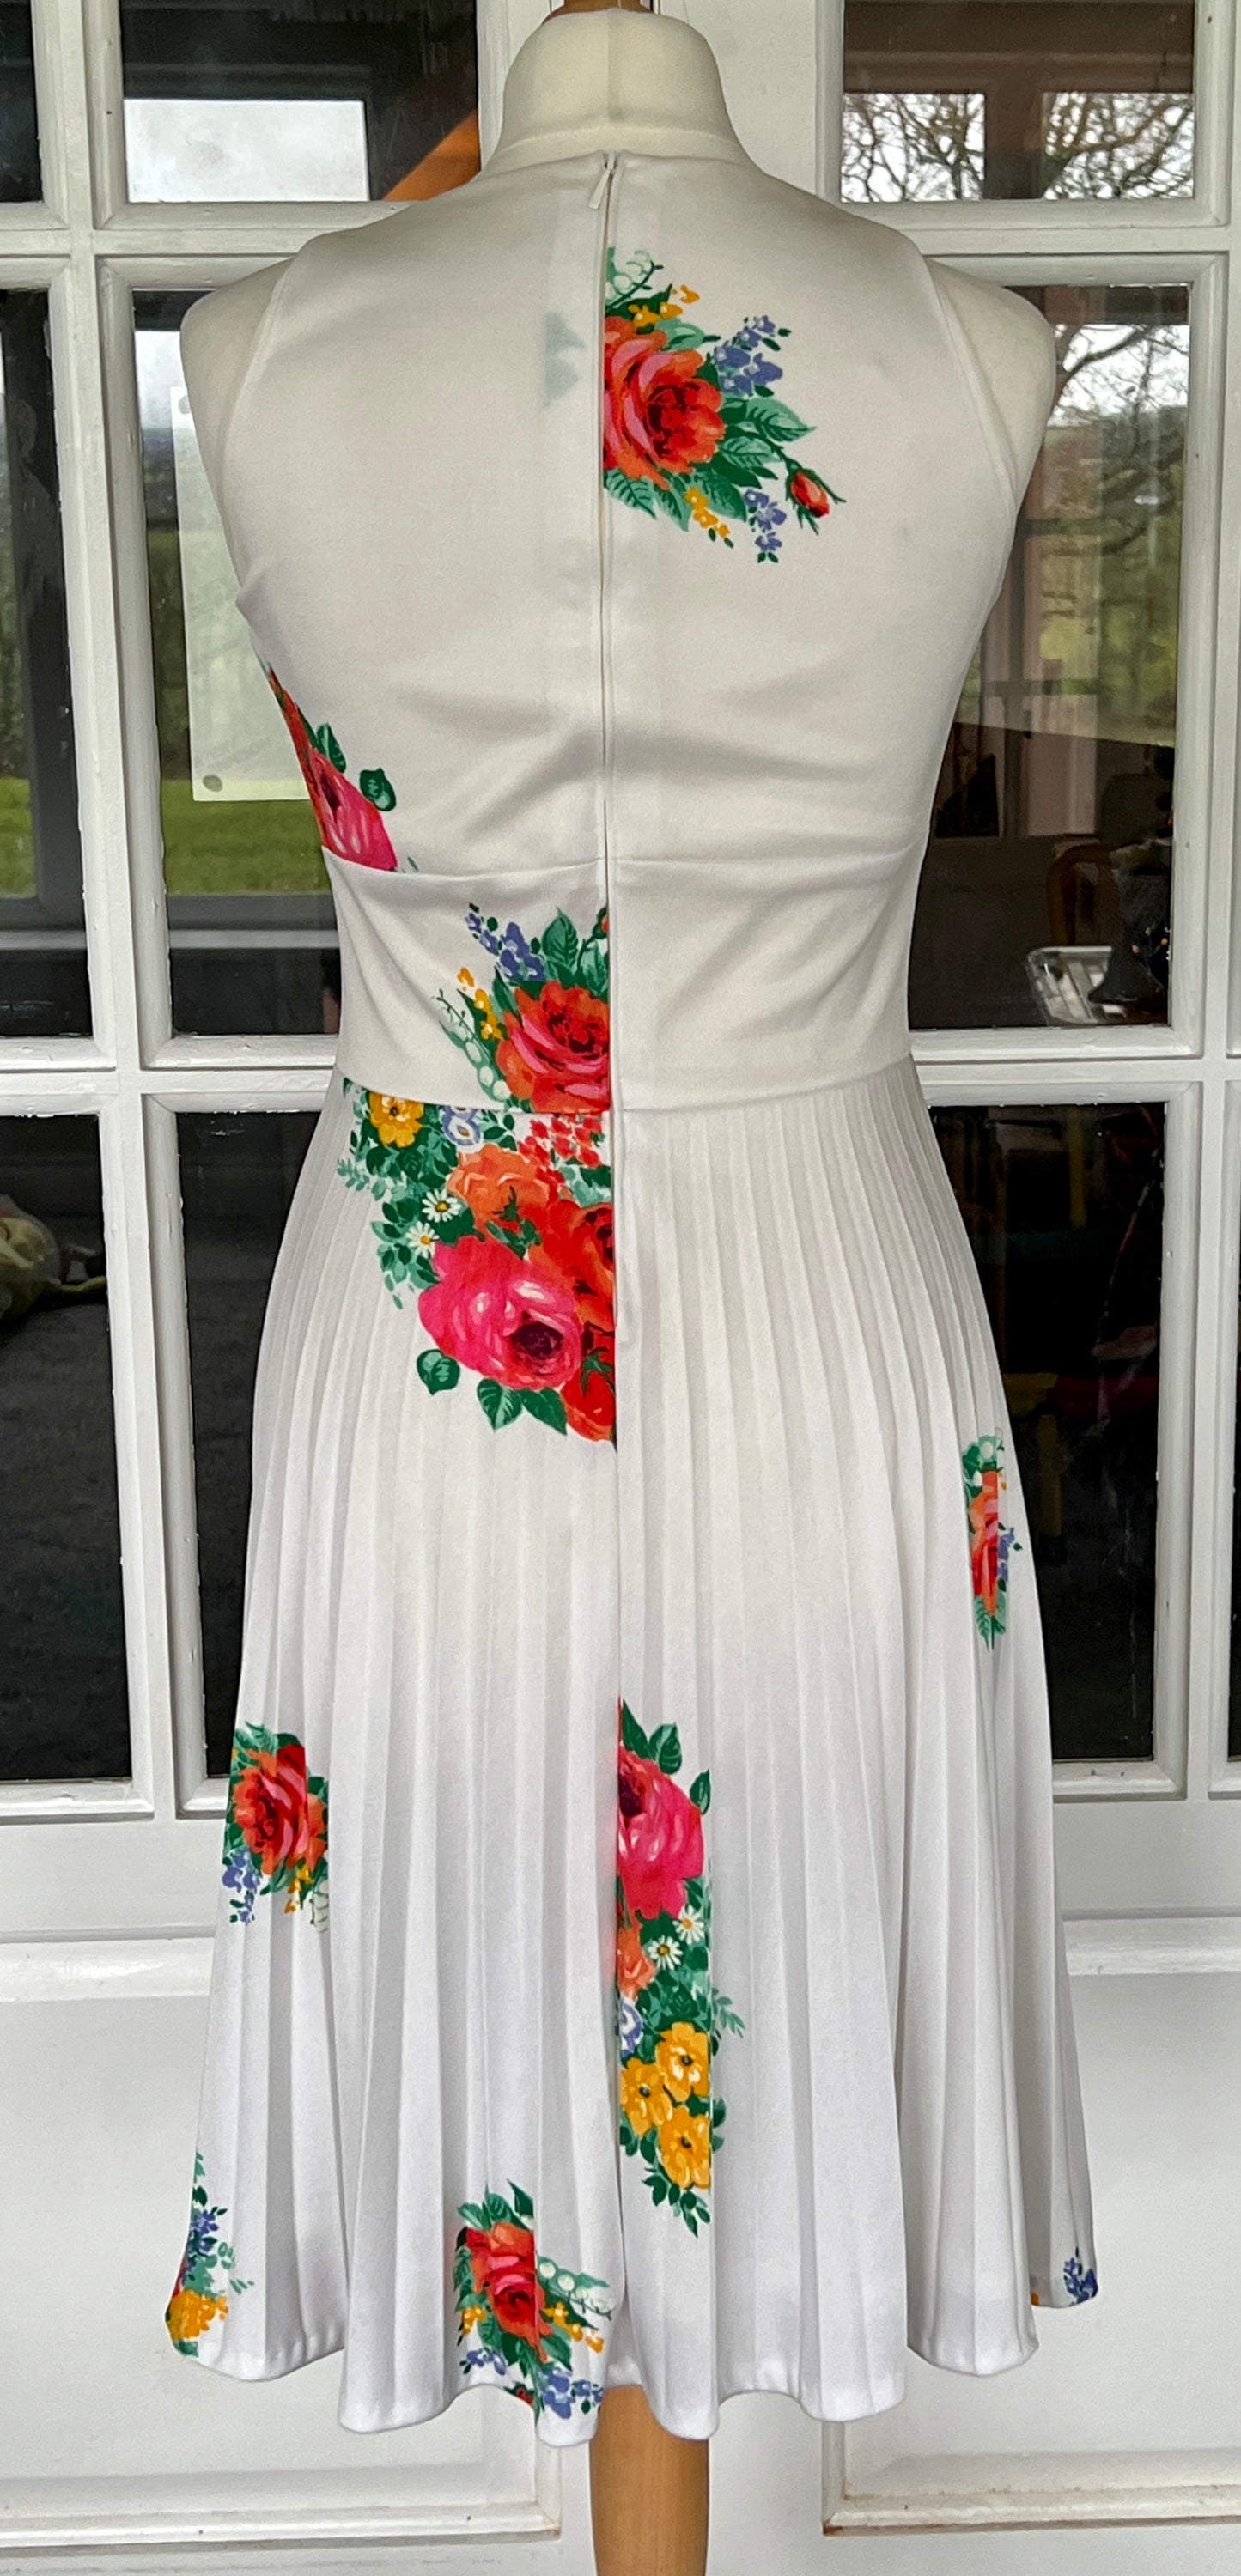 Vintage 1970s deep v neck white with red roses dress permanently pleated so M